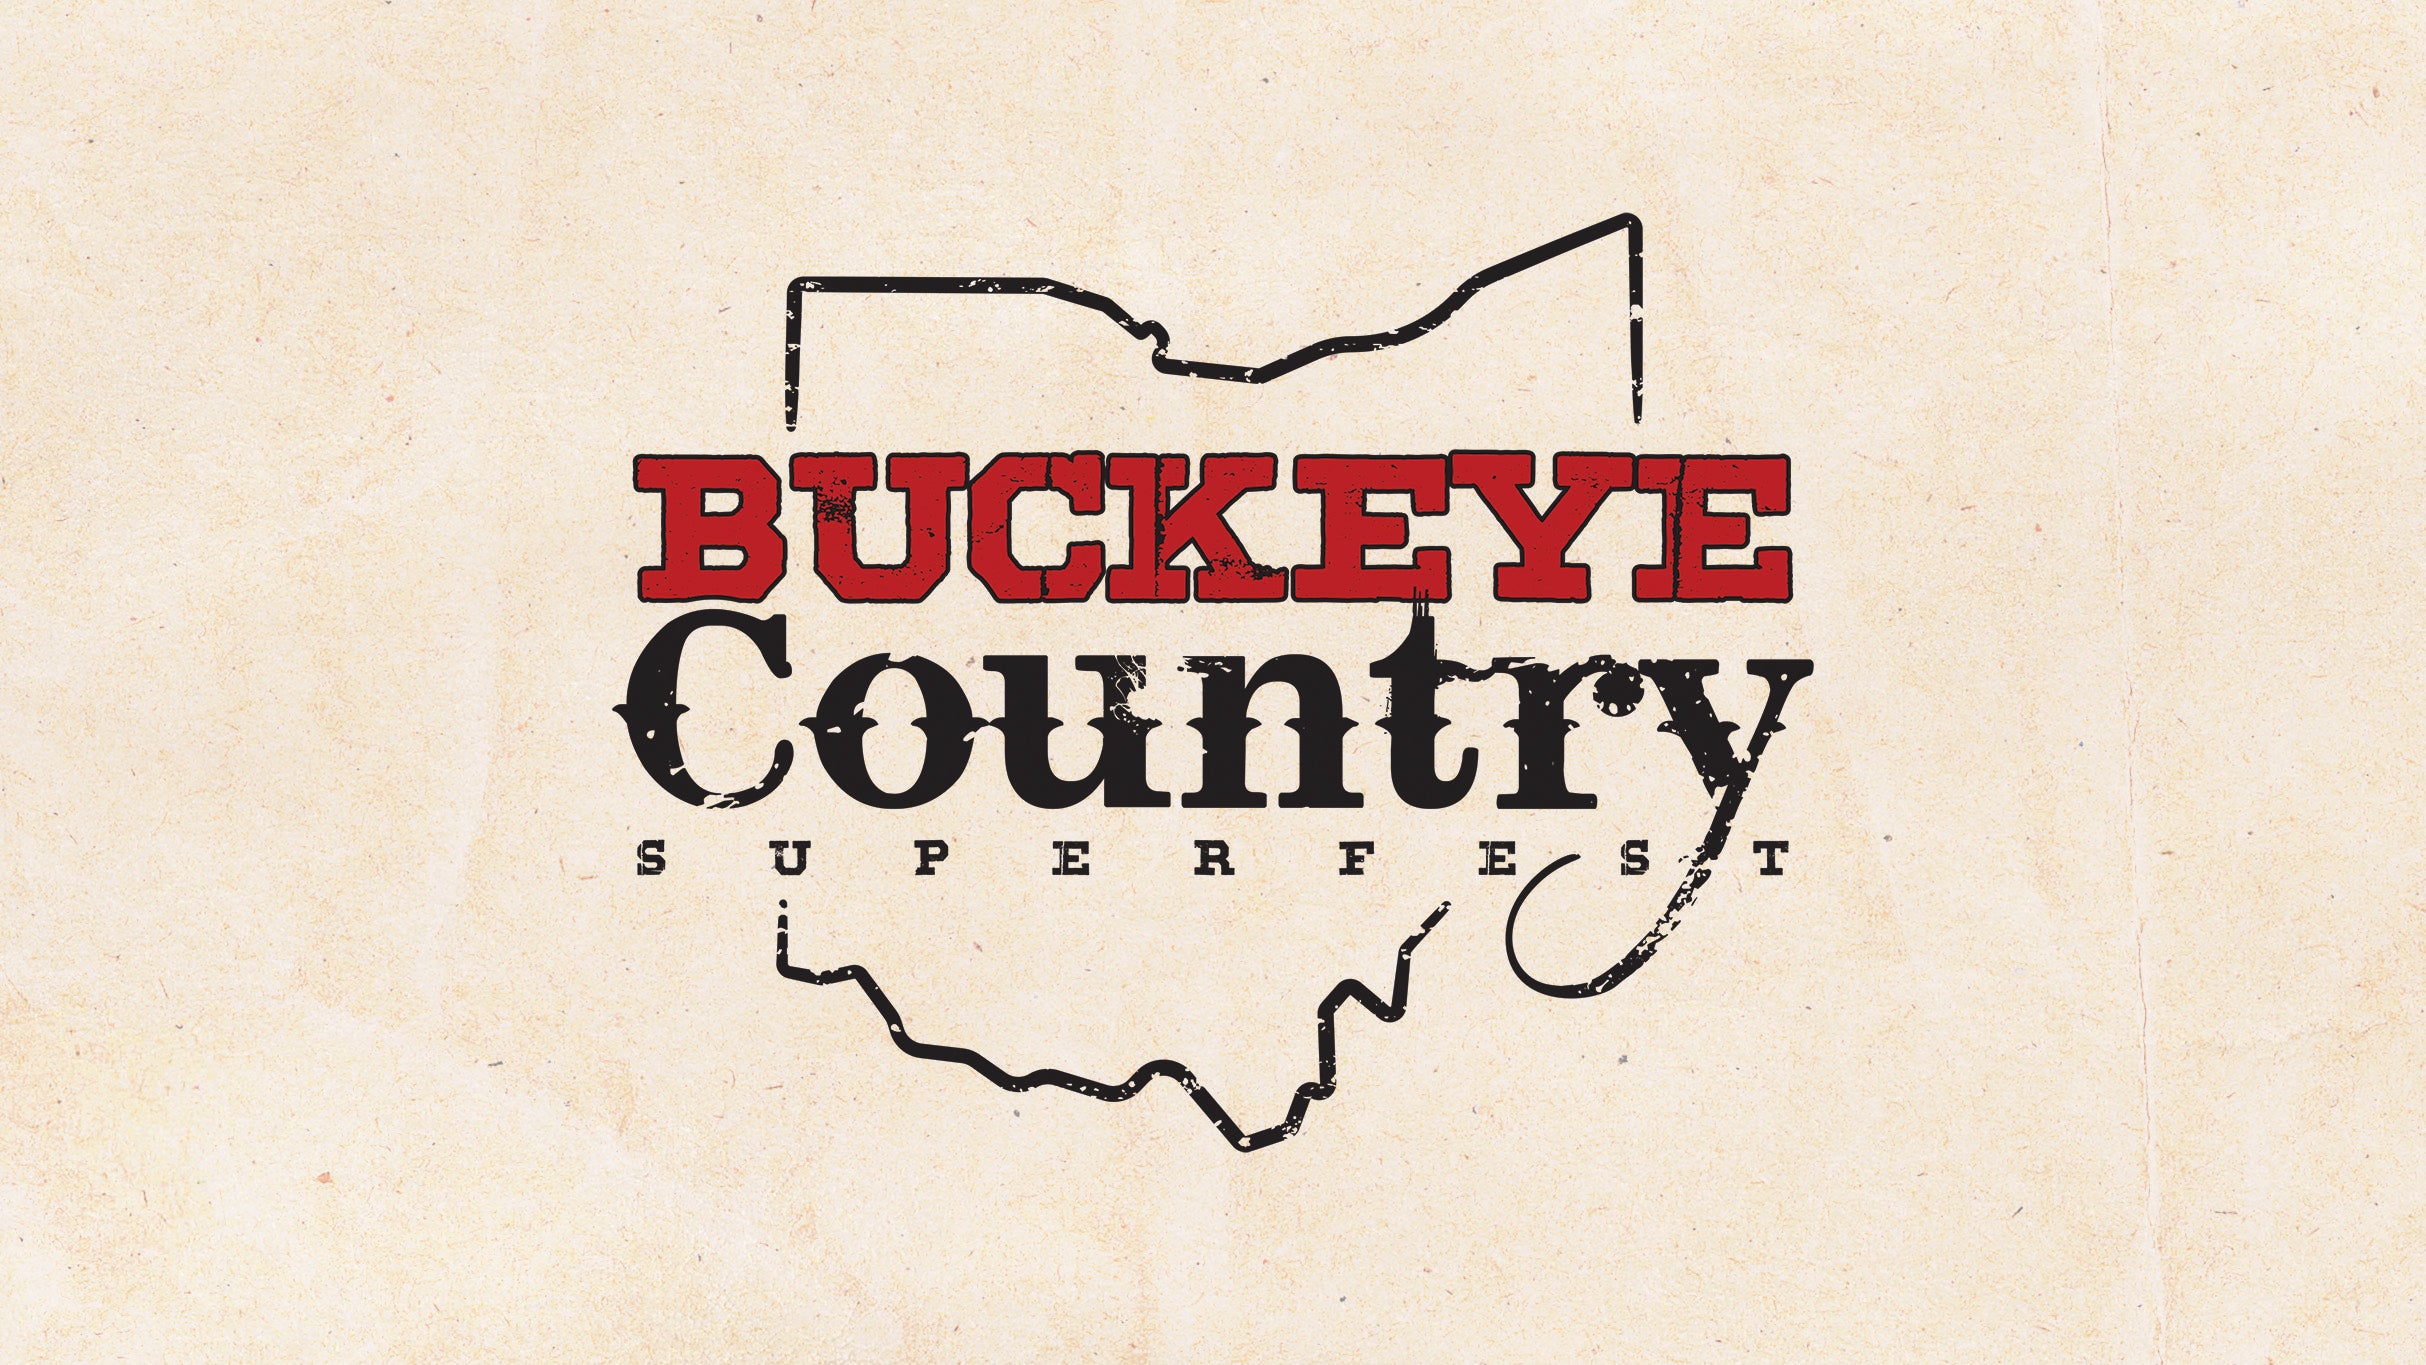 Buckeye Country Superfest starring Zach Bryan presale code for event tickets in Columbus, OH (Ohio Stadium)